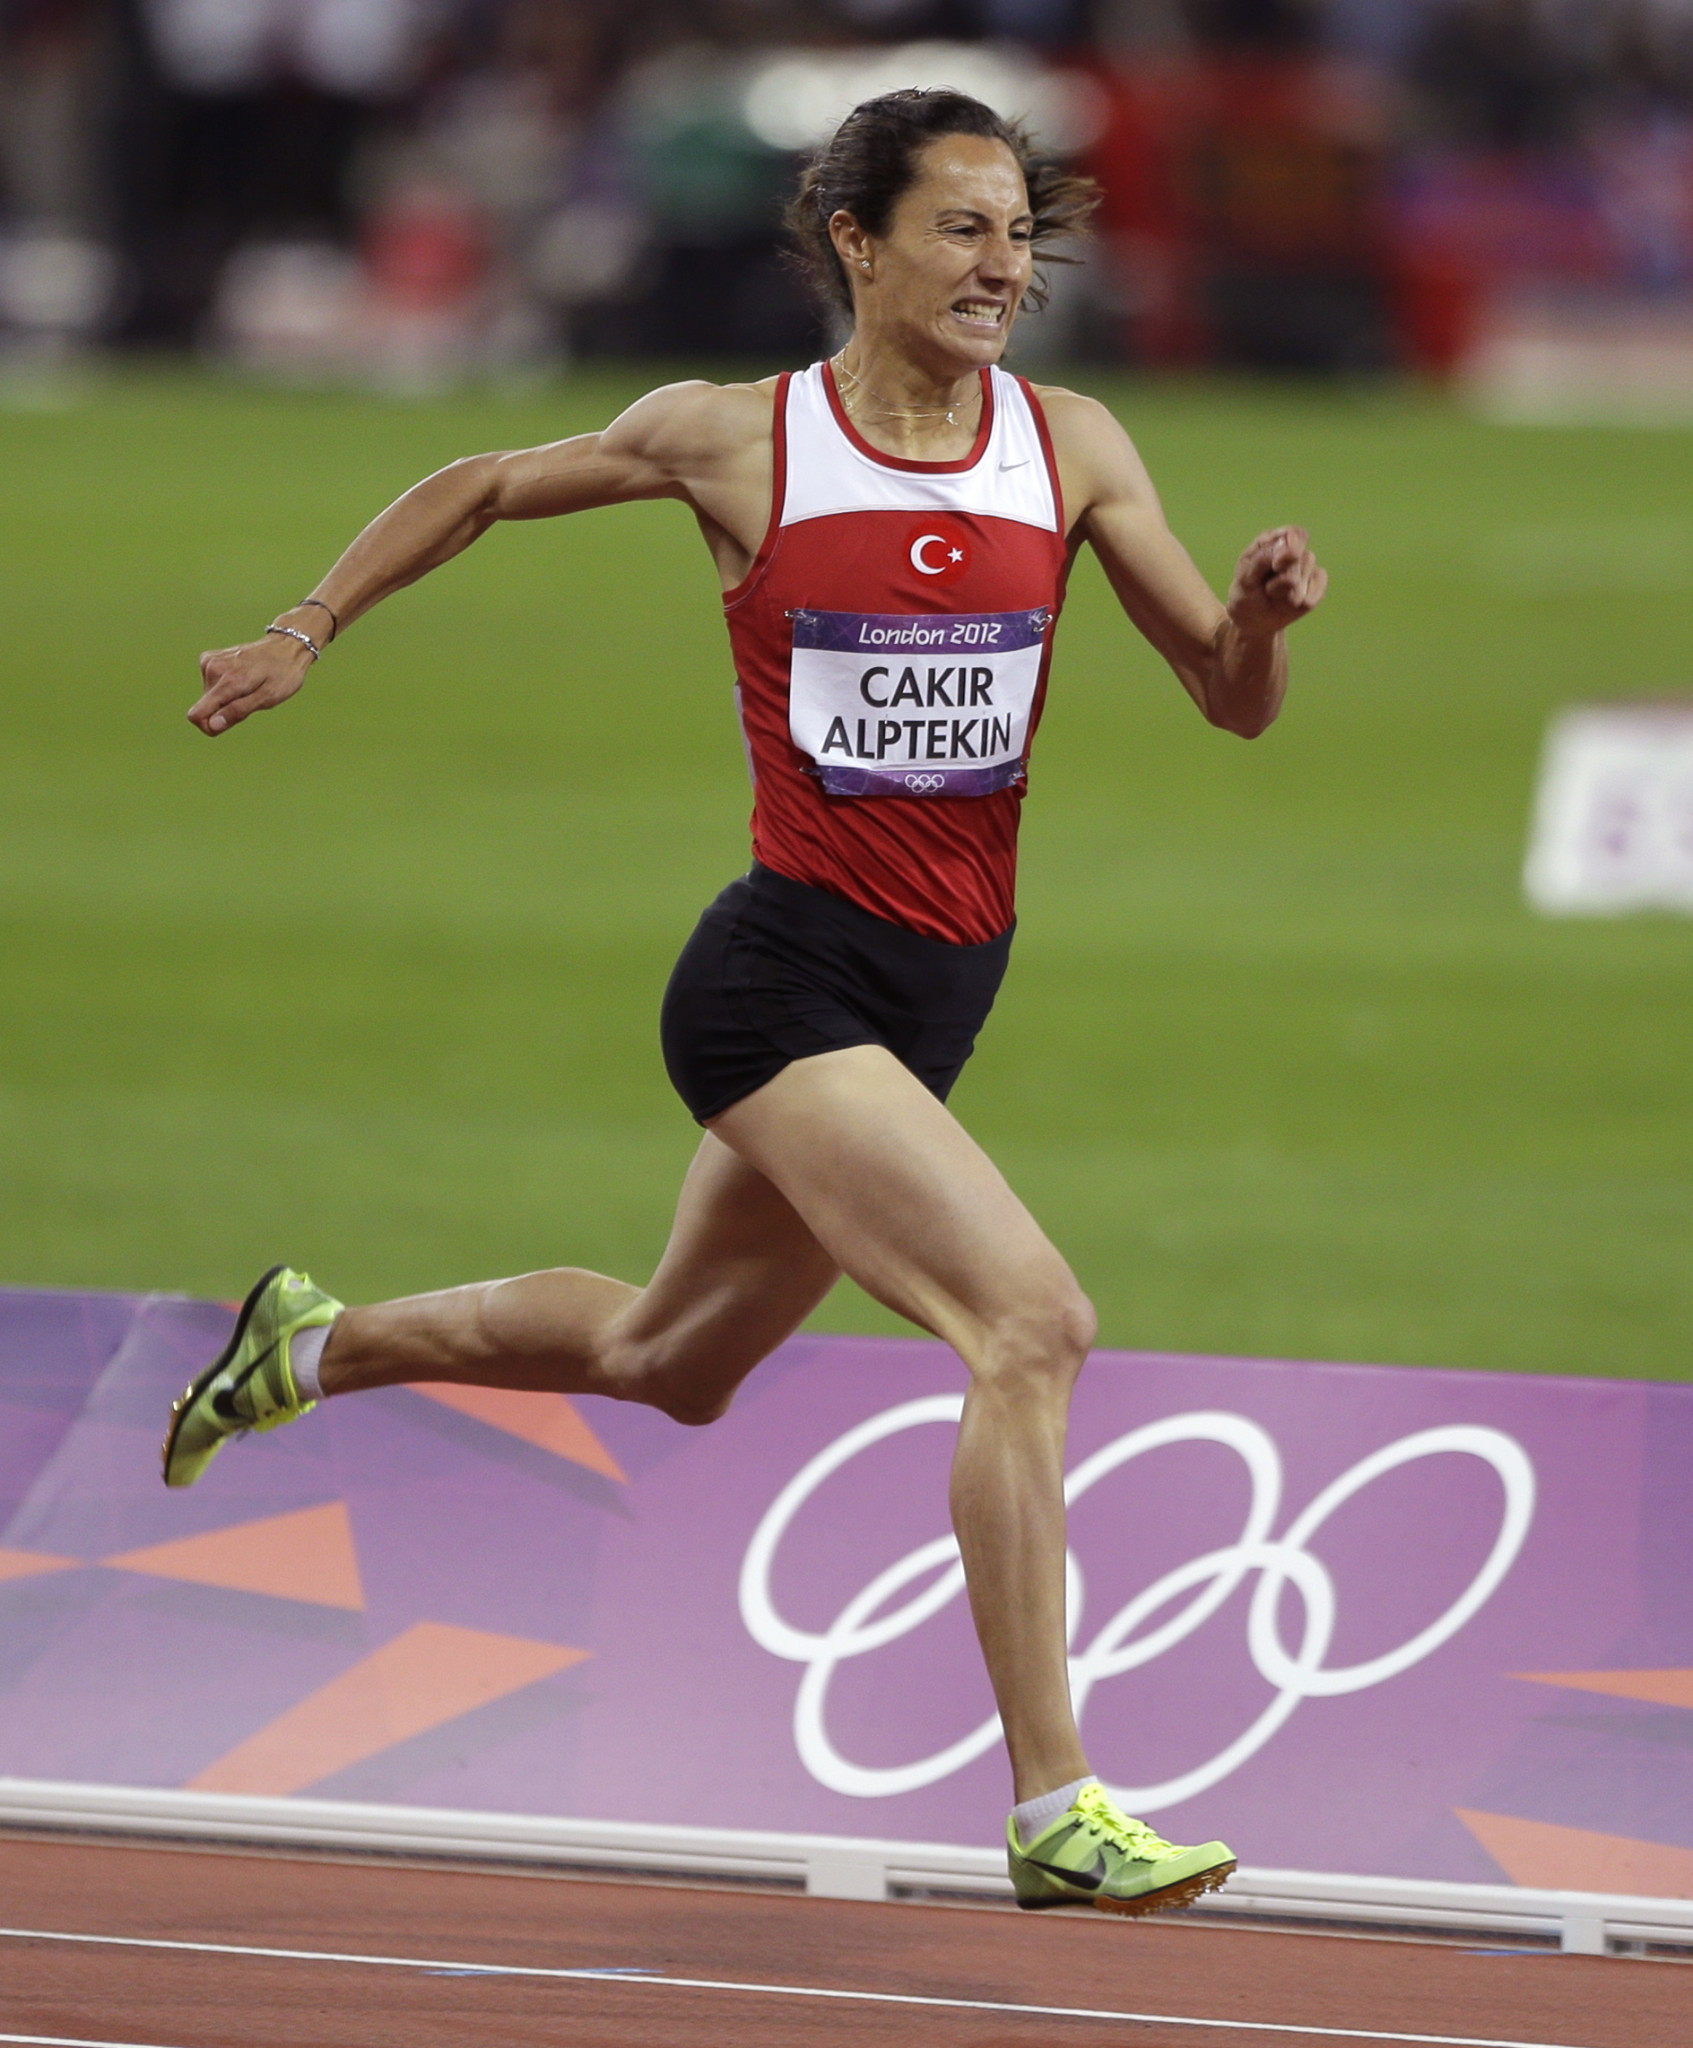 Turkey's Aslı Çakır Alptekin was stripped of her Olympic 1500m gold medal from London 2012 after her athlete biological passport found anomalies ©Getty Images